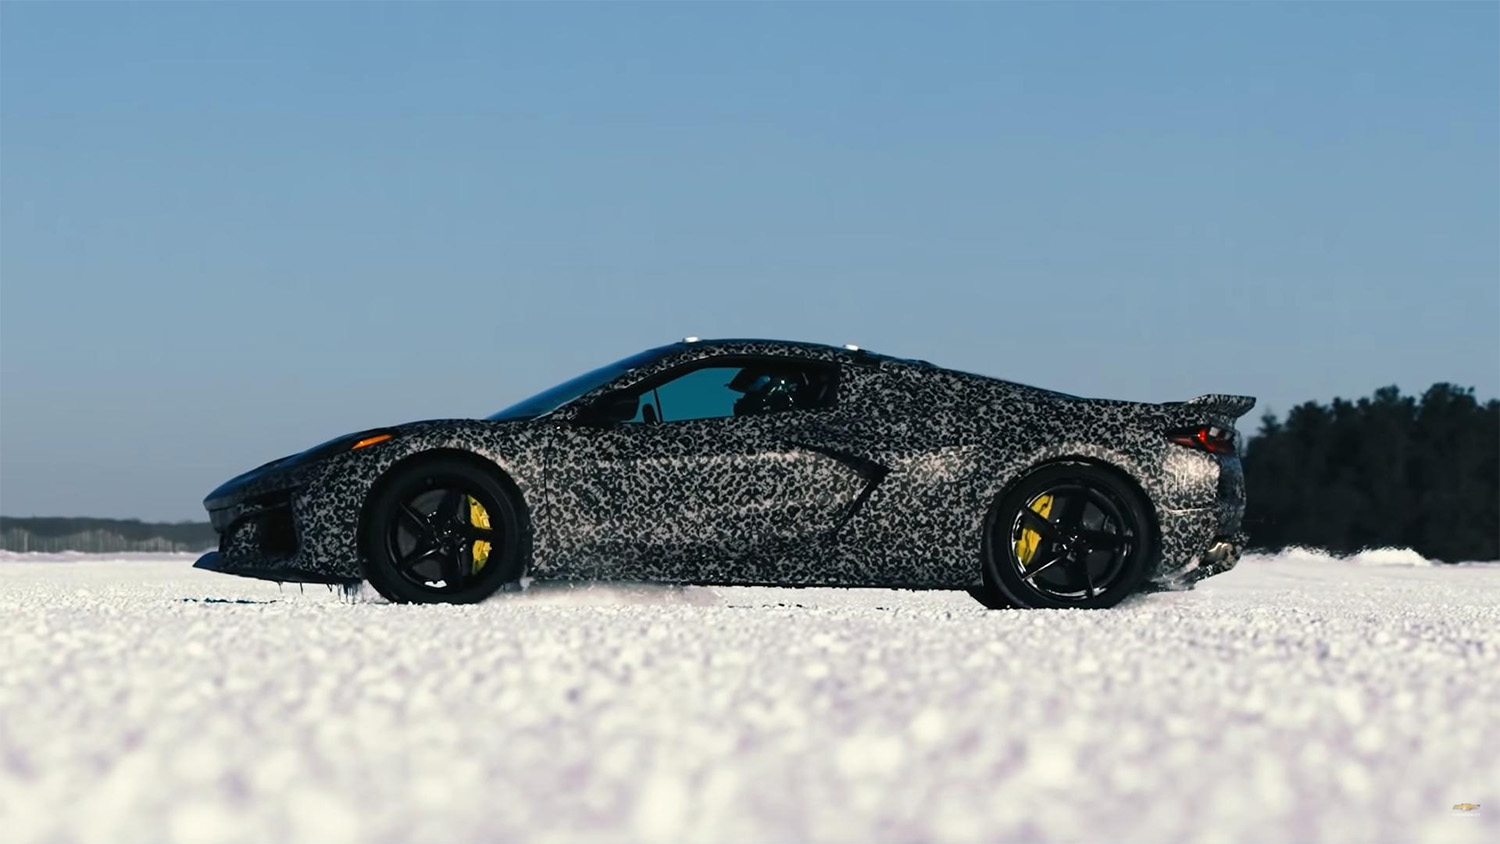 Side view of the electrified hybrid all-wheel drive Corvette test mule from Chevy's new Youtube Video